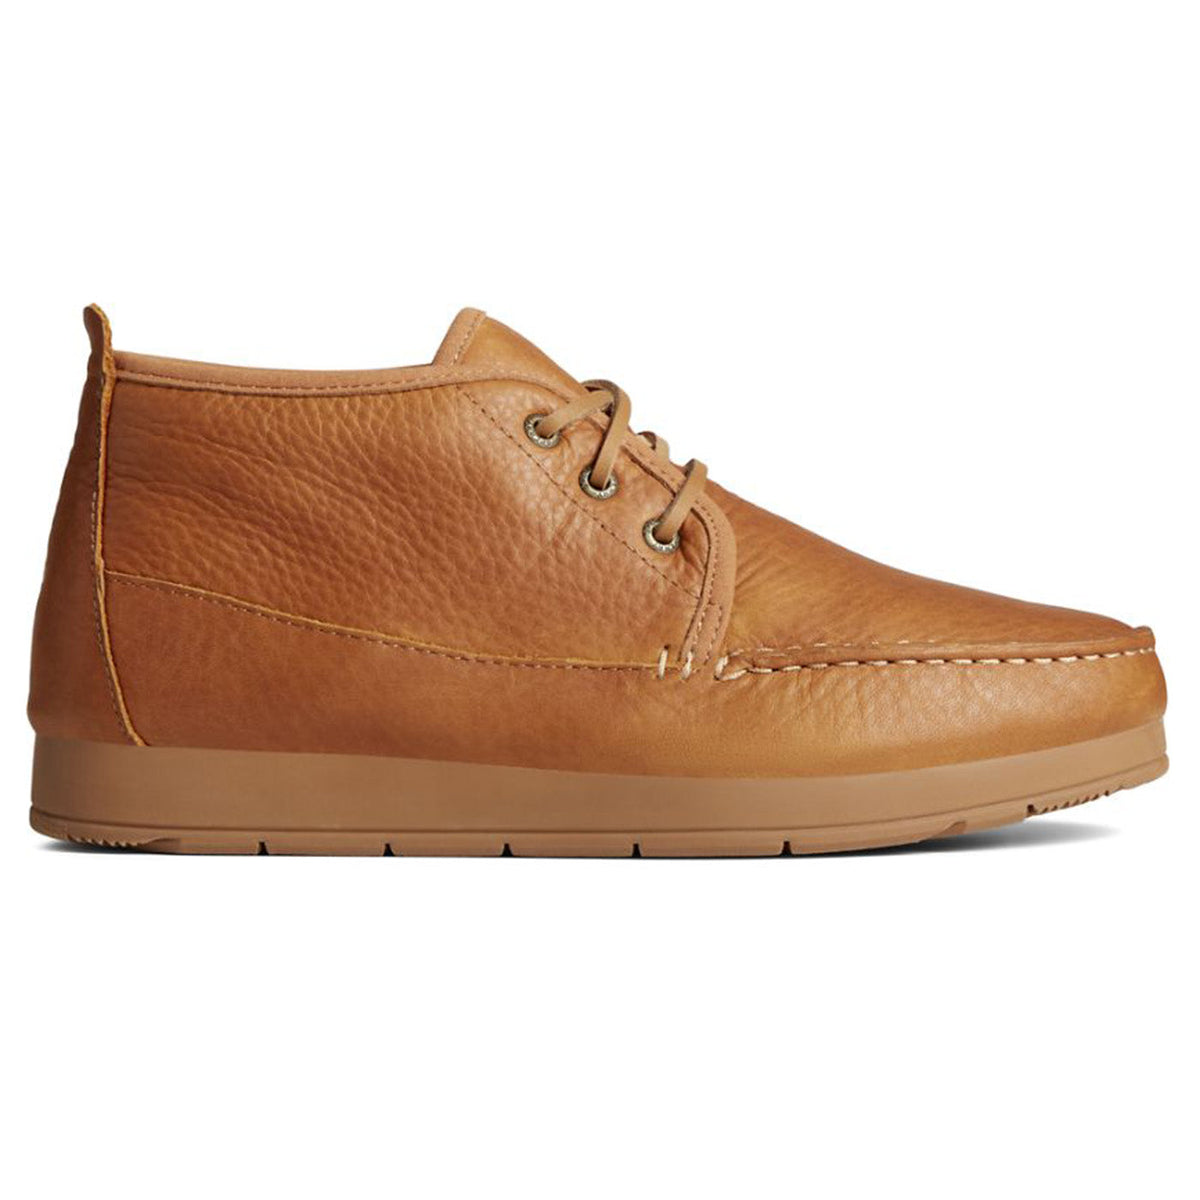 Sperry Moc-Sider Chukka Boots